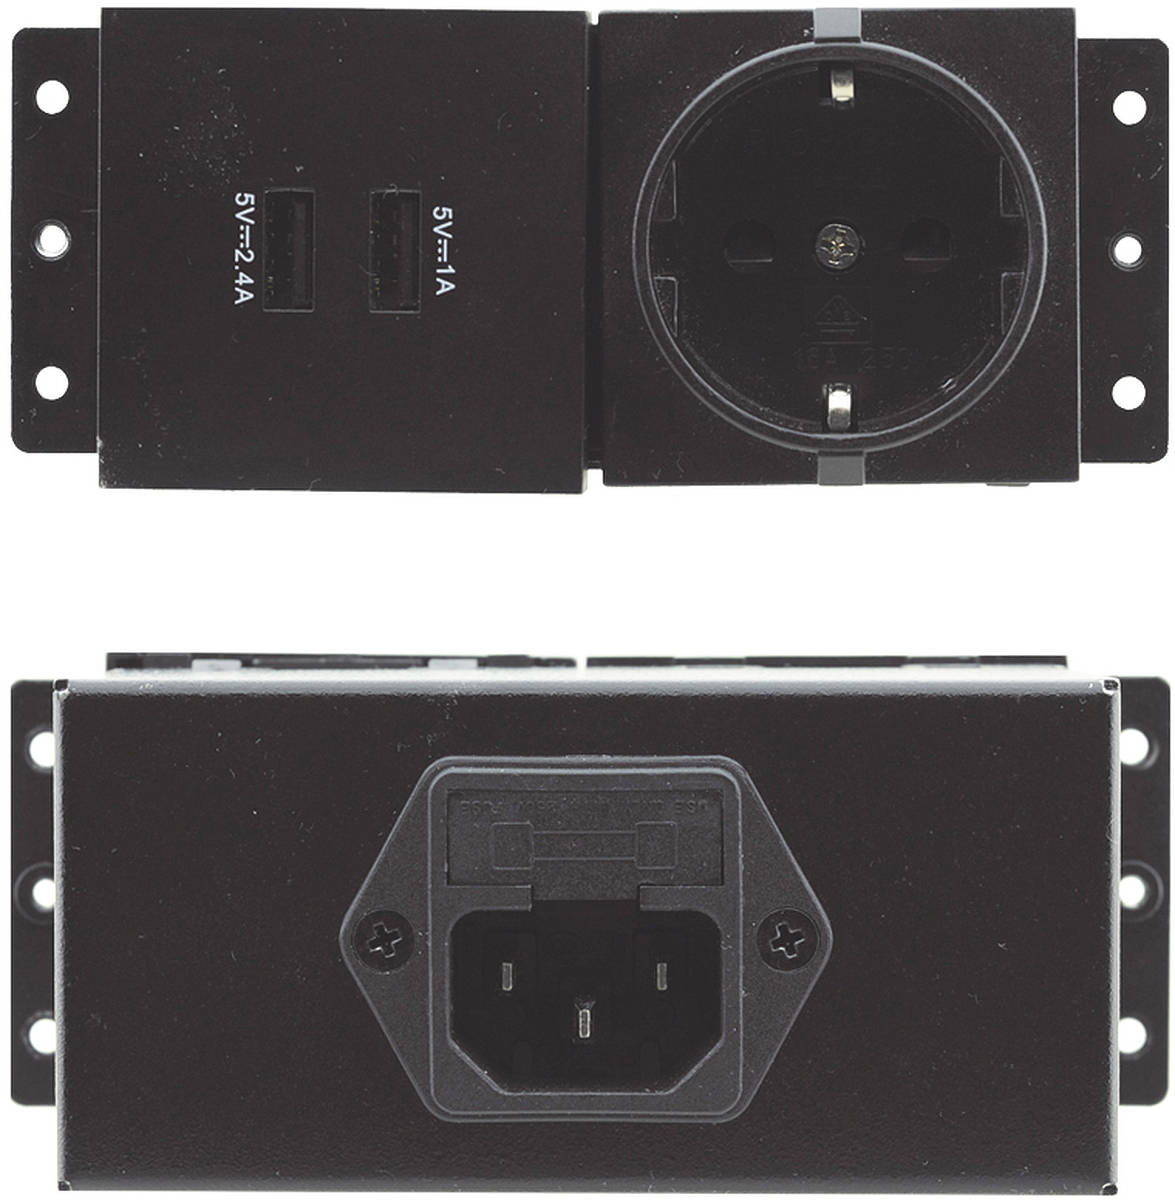 Kramer TS-UC TBUS power socket module with 2 USB charging ports product image. Click to enlarge.